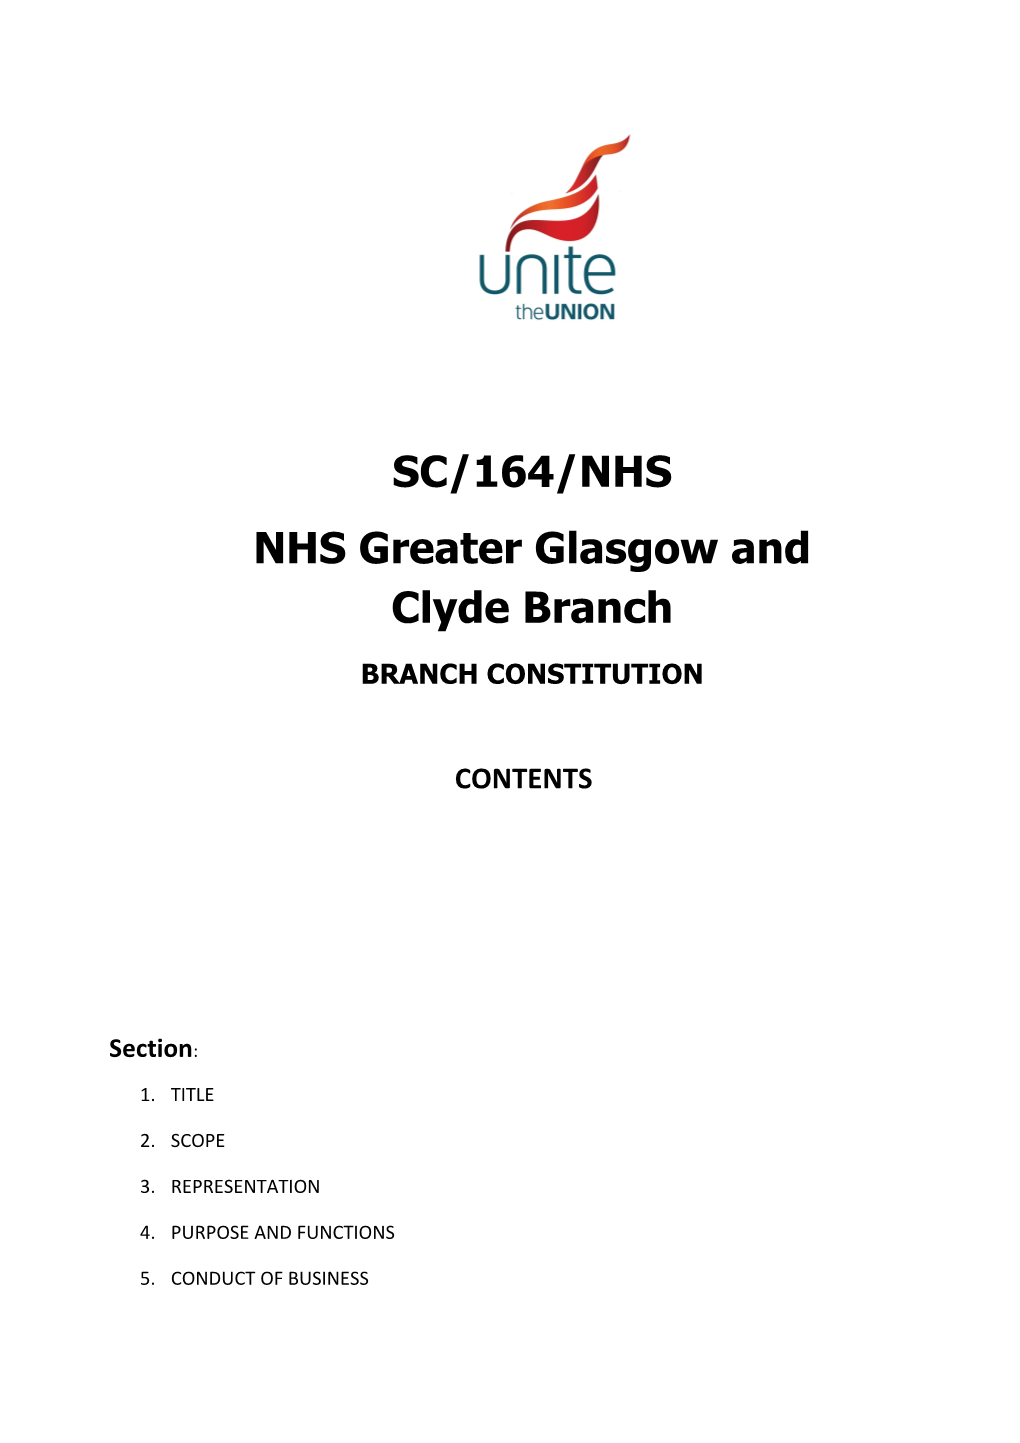 1.1The Branch Shall Be Called SC/164/NHS NHS Greater Glasgow and Clyde Branch, Referred